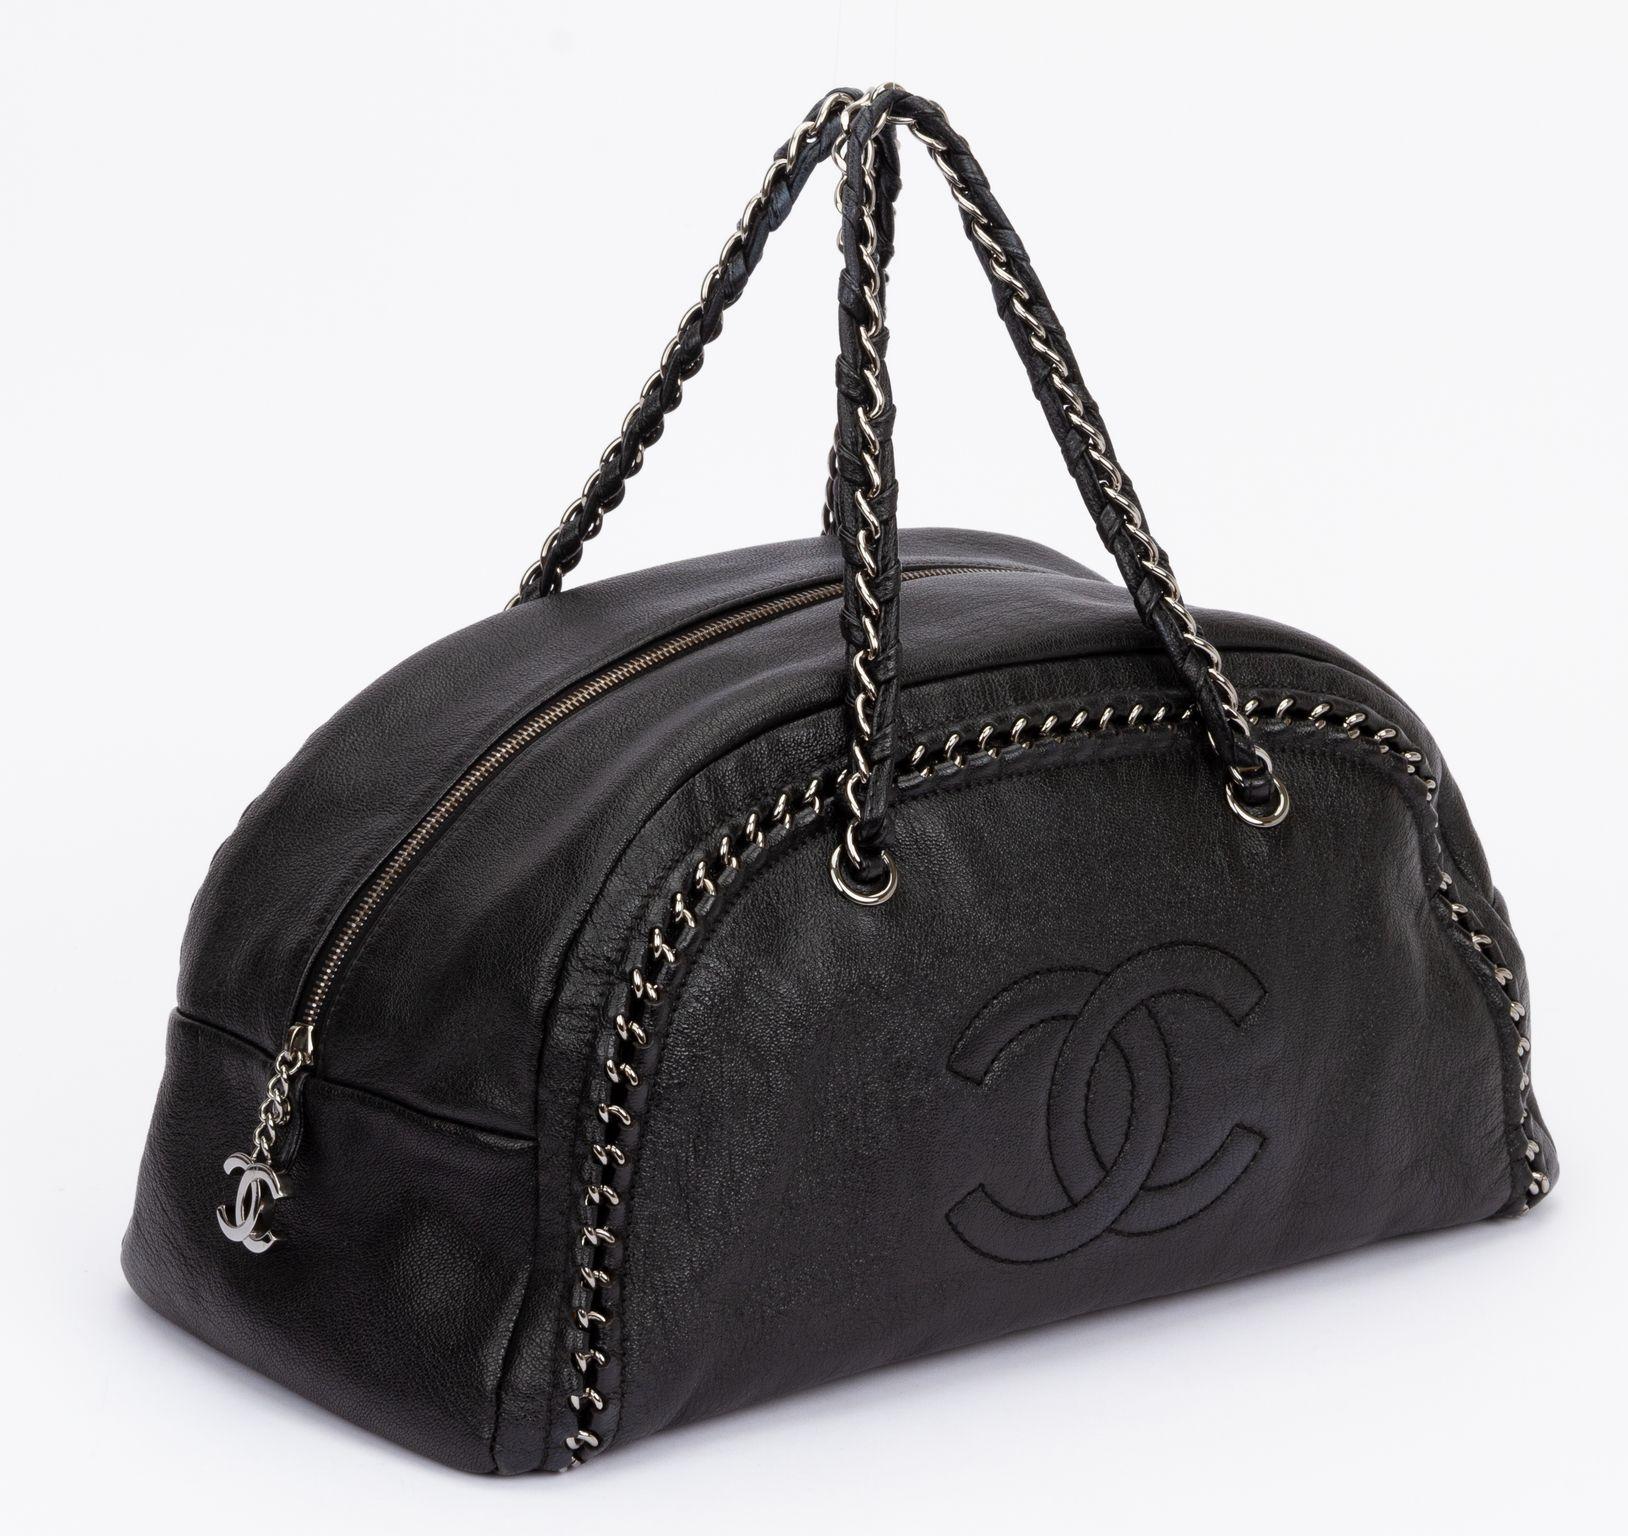 Chanel Luxe Ligne Bowler Bag in black. The is crafted of calfskin leather and featuring tonal top stitching and interlocking 'CC' embroidery on front, finished with woven silver-tone chain-link hardware. The drop of the handle is 7.5